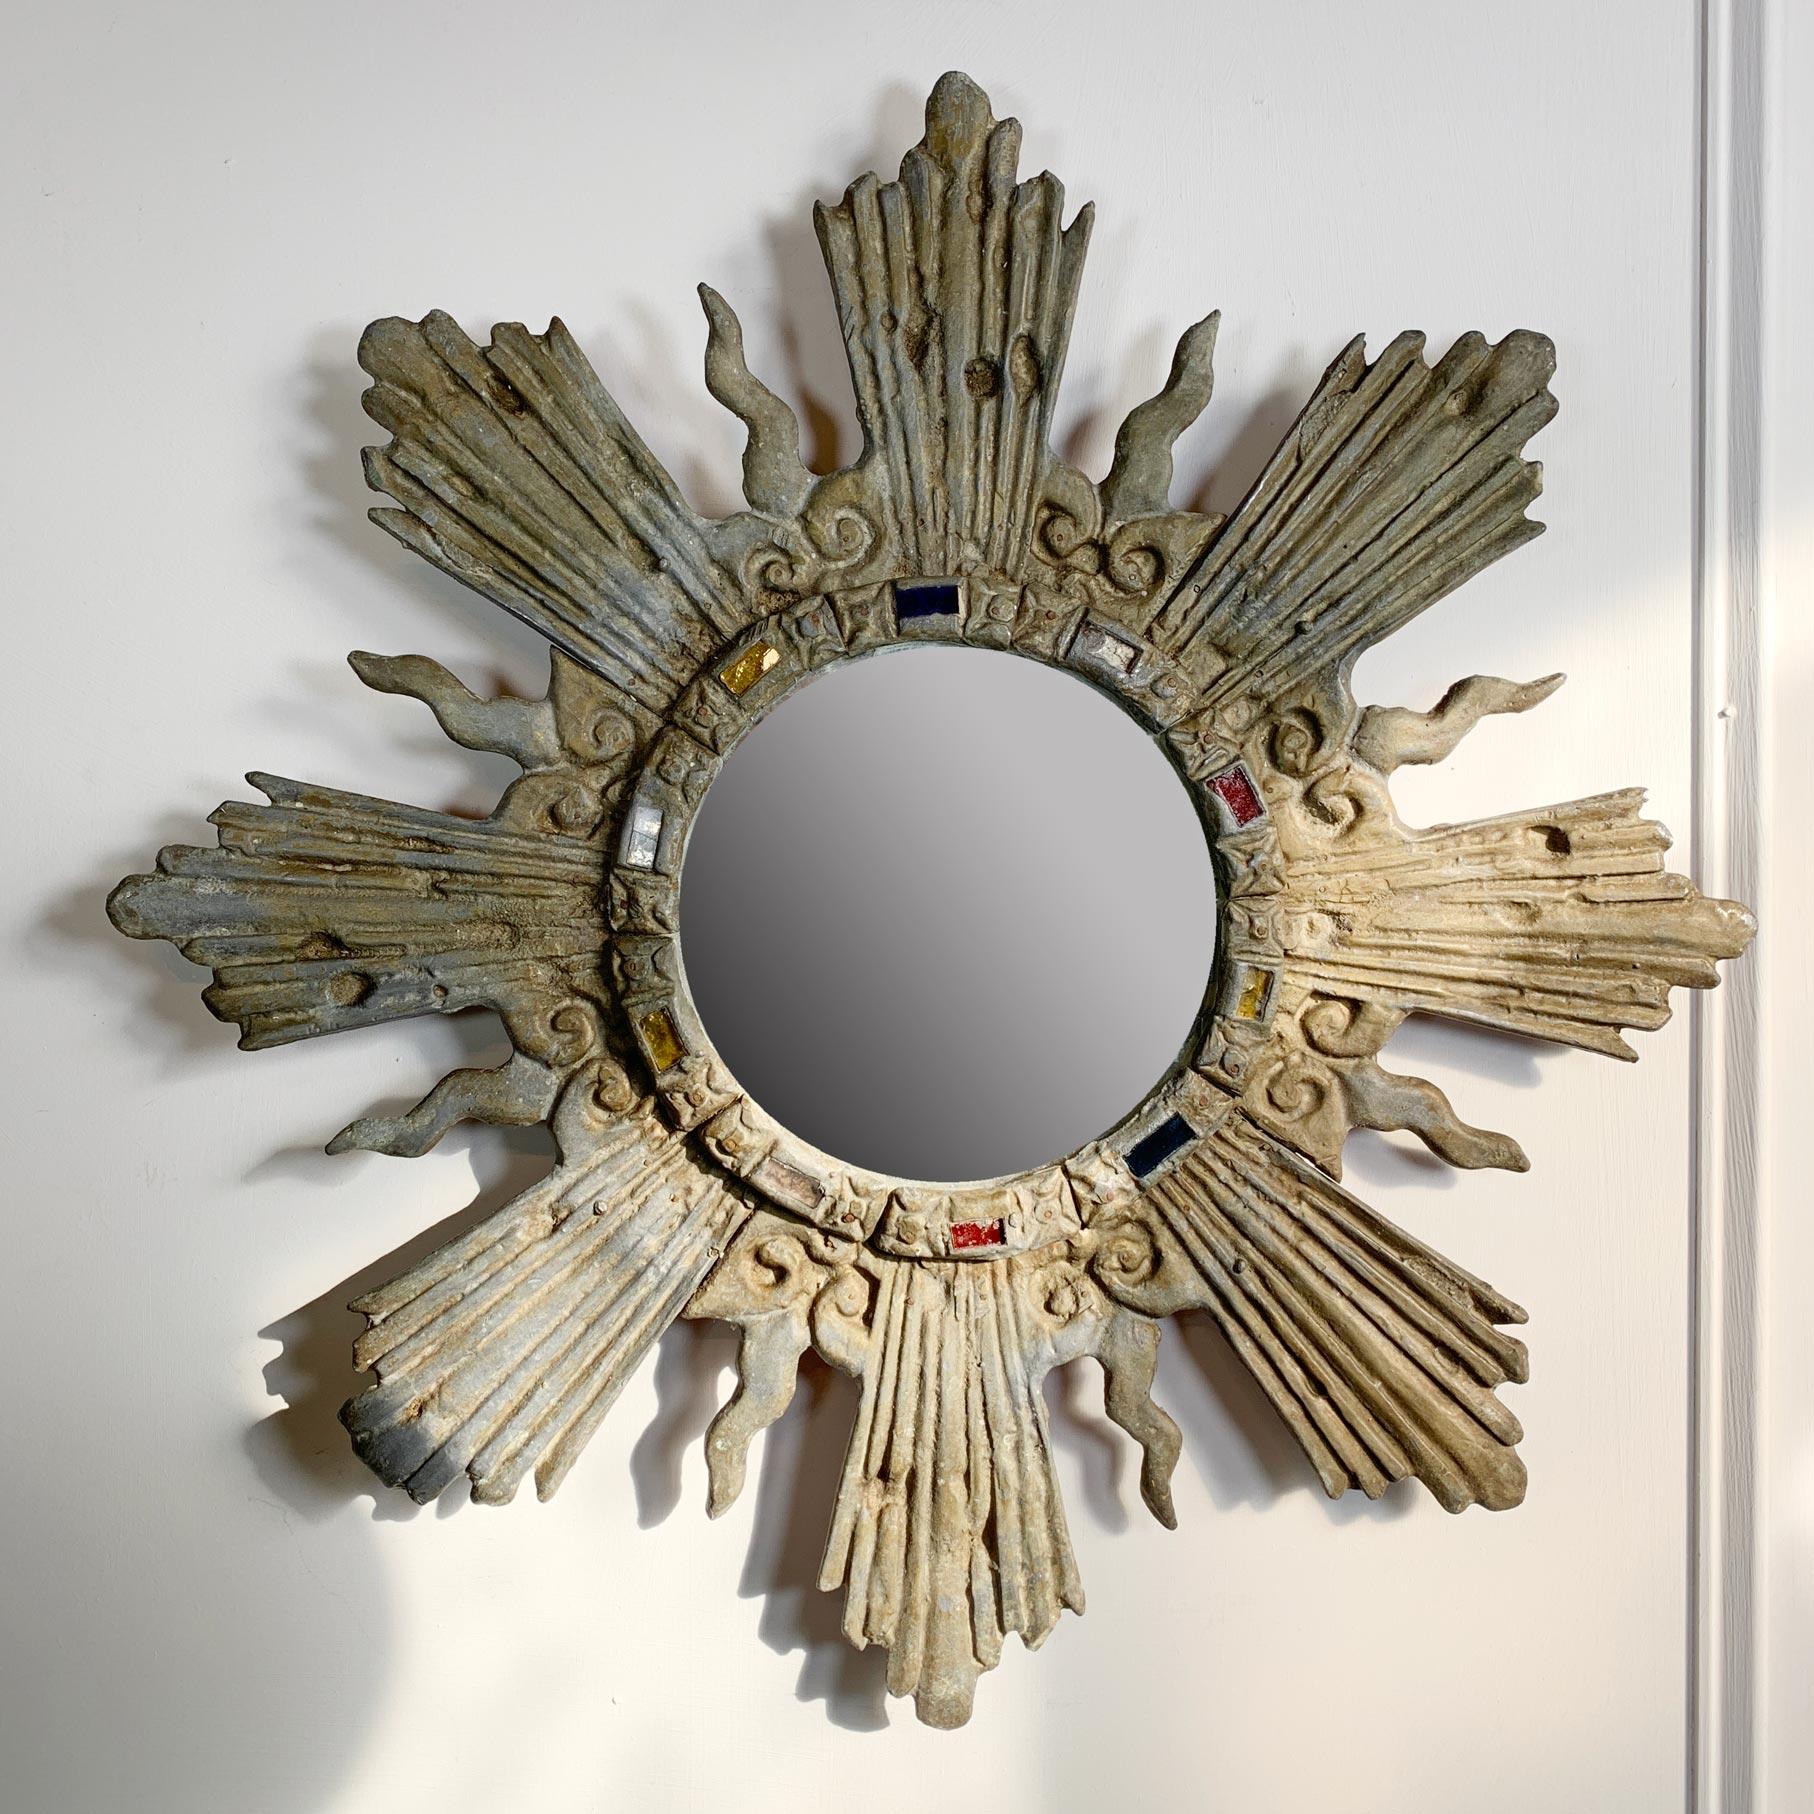 A heavy hand crafted lead sunburst mirror, the hammered and shaped rays stretch out from the central circular foxed mirror, which is decorated with a ring of coloured glass, very much in the manner of Line Vautrin.

French and dating to the